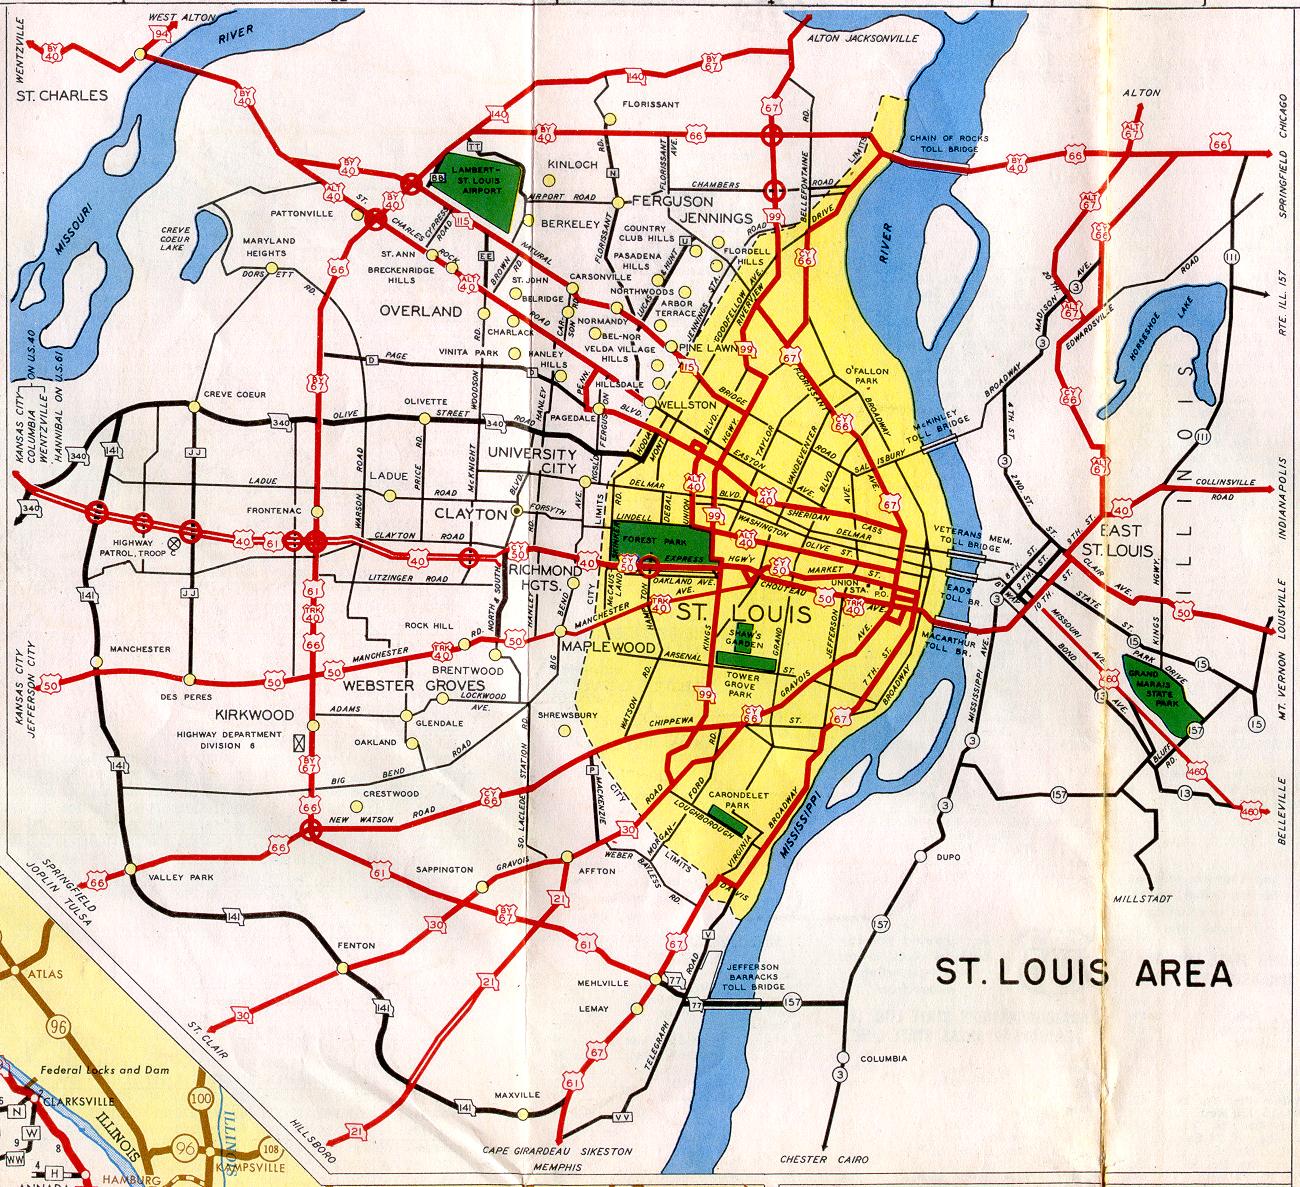 Inset map for St. Louis, Mo. (1952)